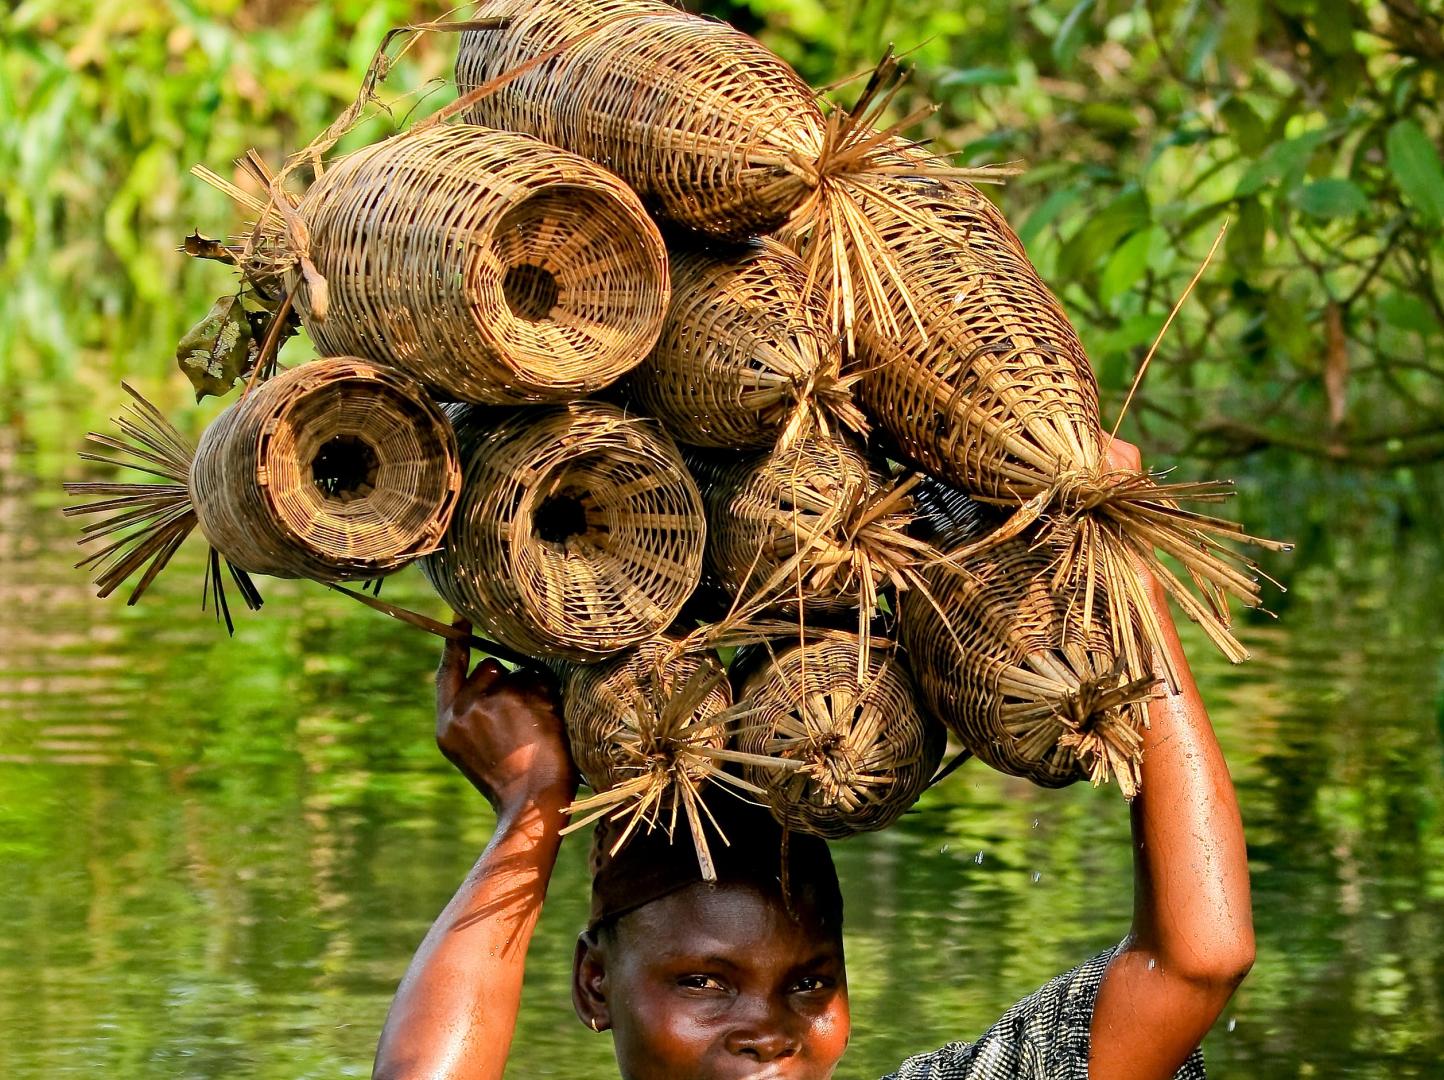 Woman in the river with fishing baskets on her head